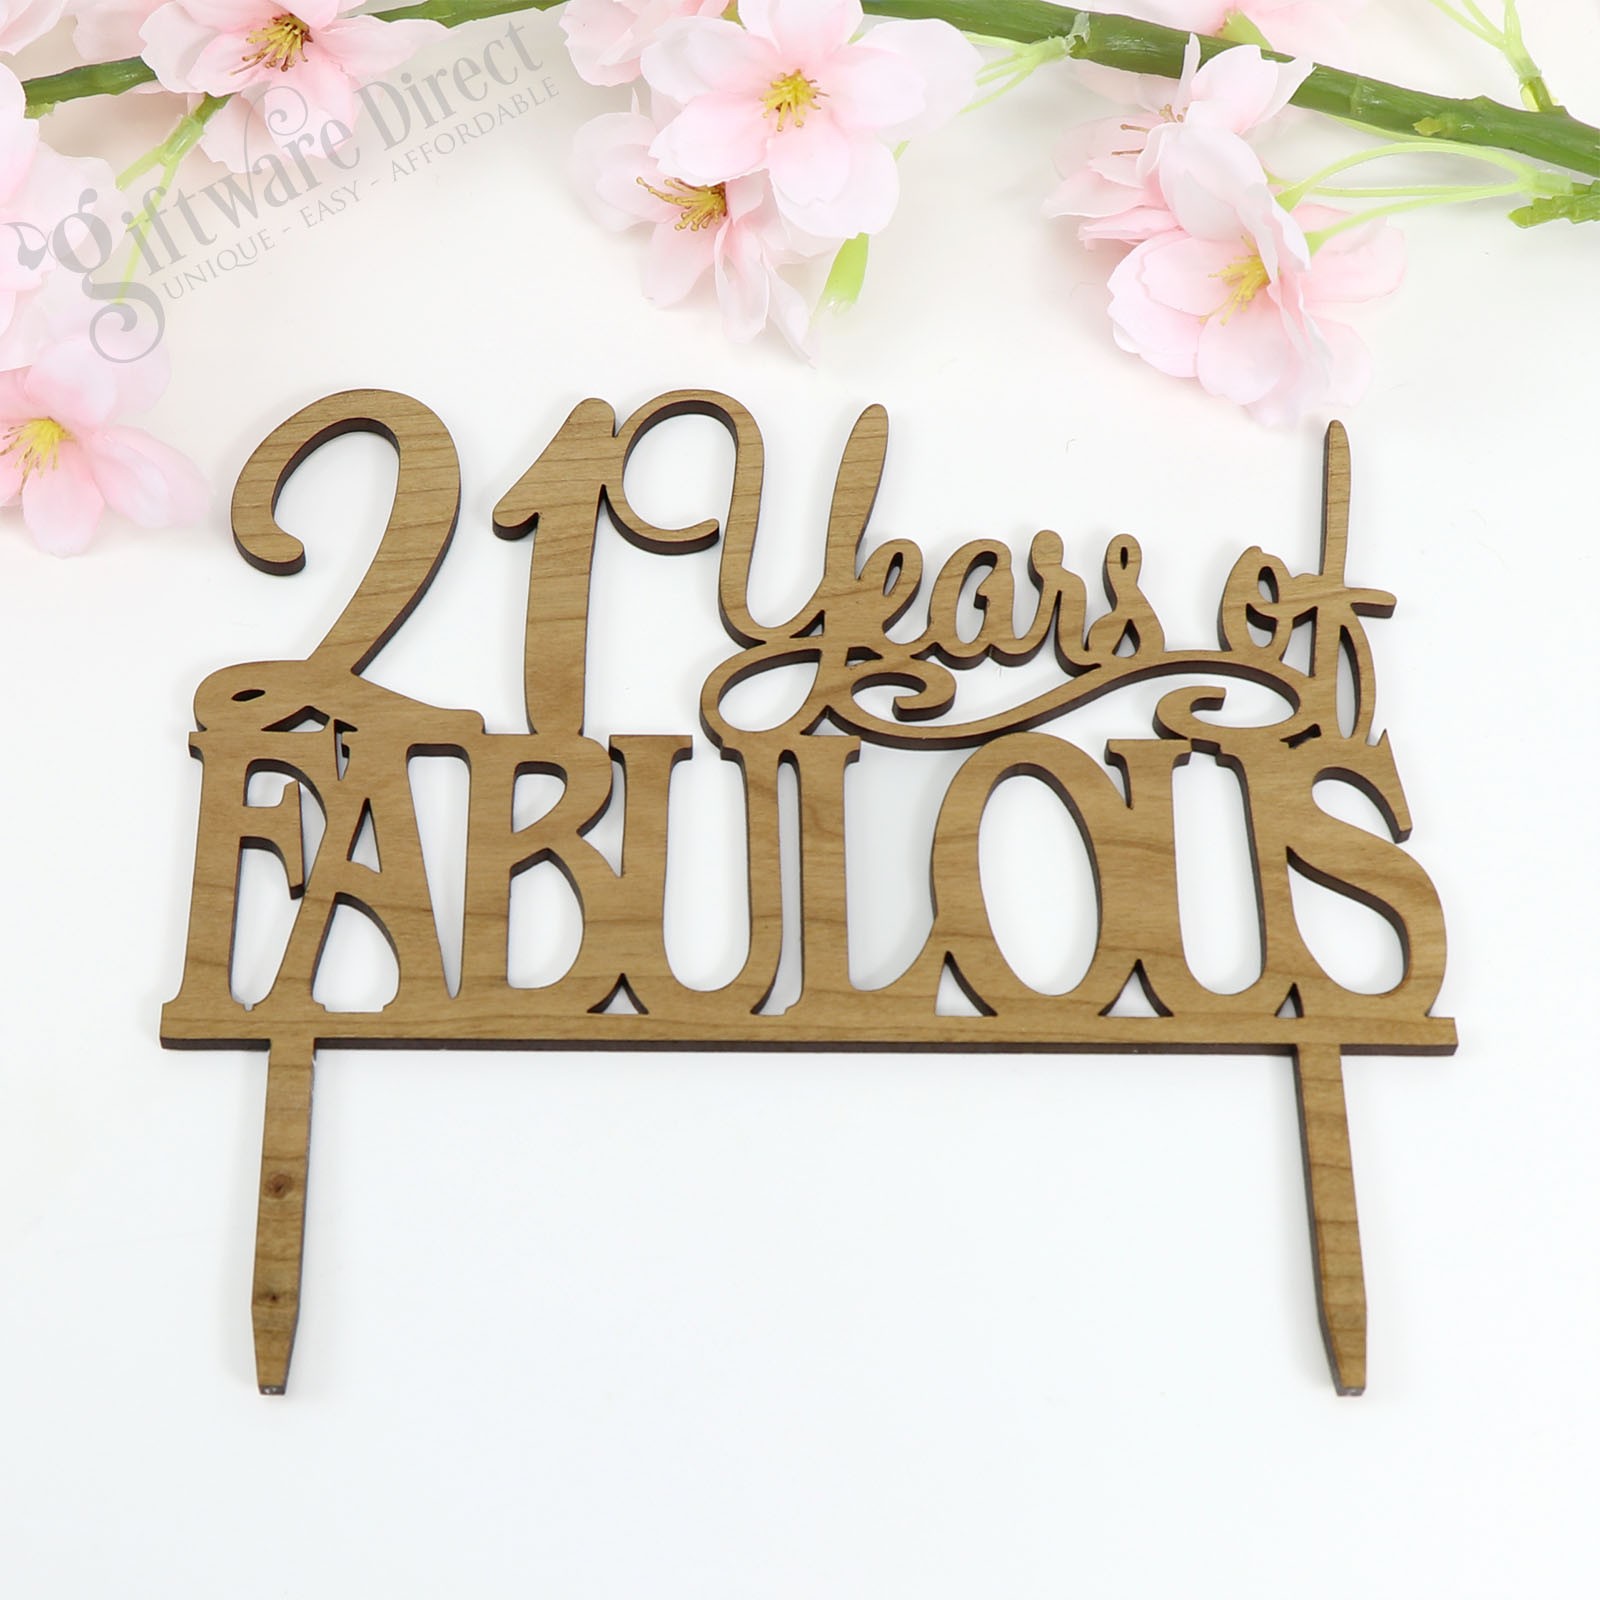 21st Birthday Present Ideas 21 Years of Fabulous Birthday Bamboo Cake Topper Any Age topper